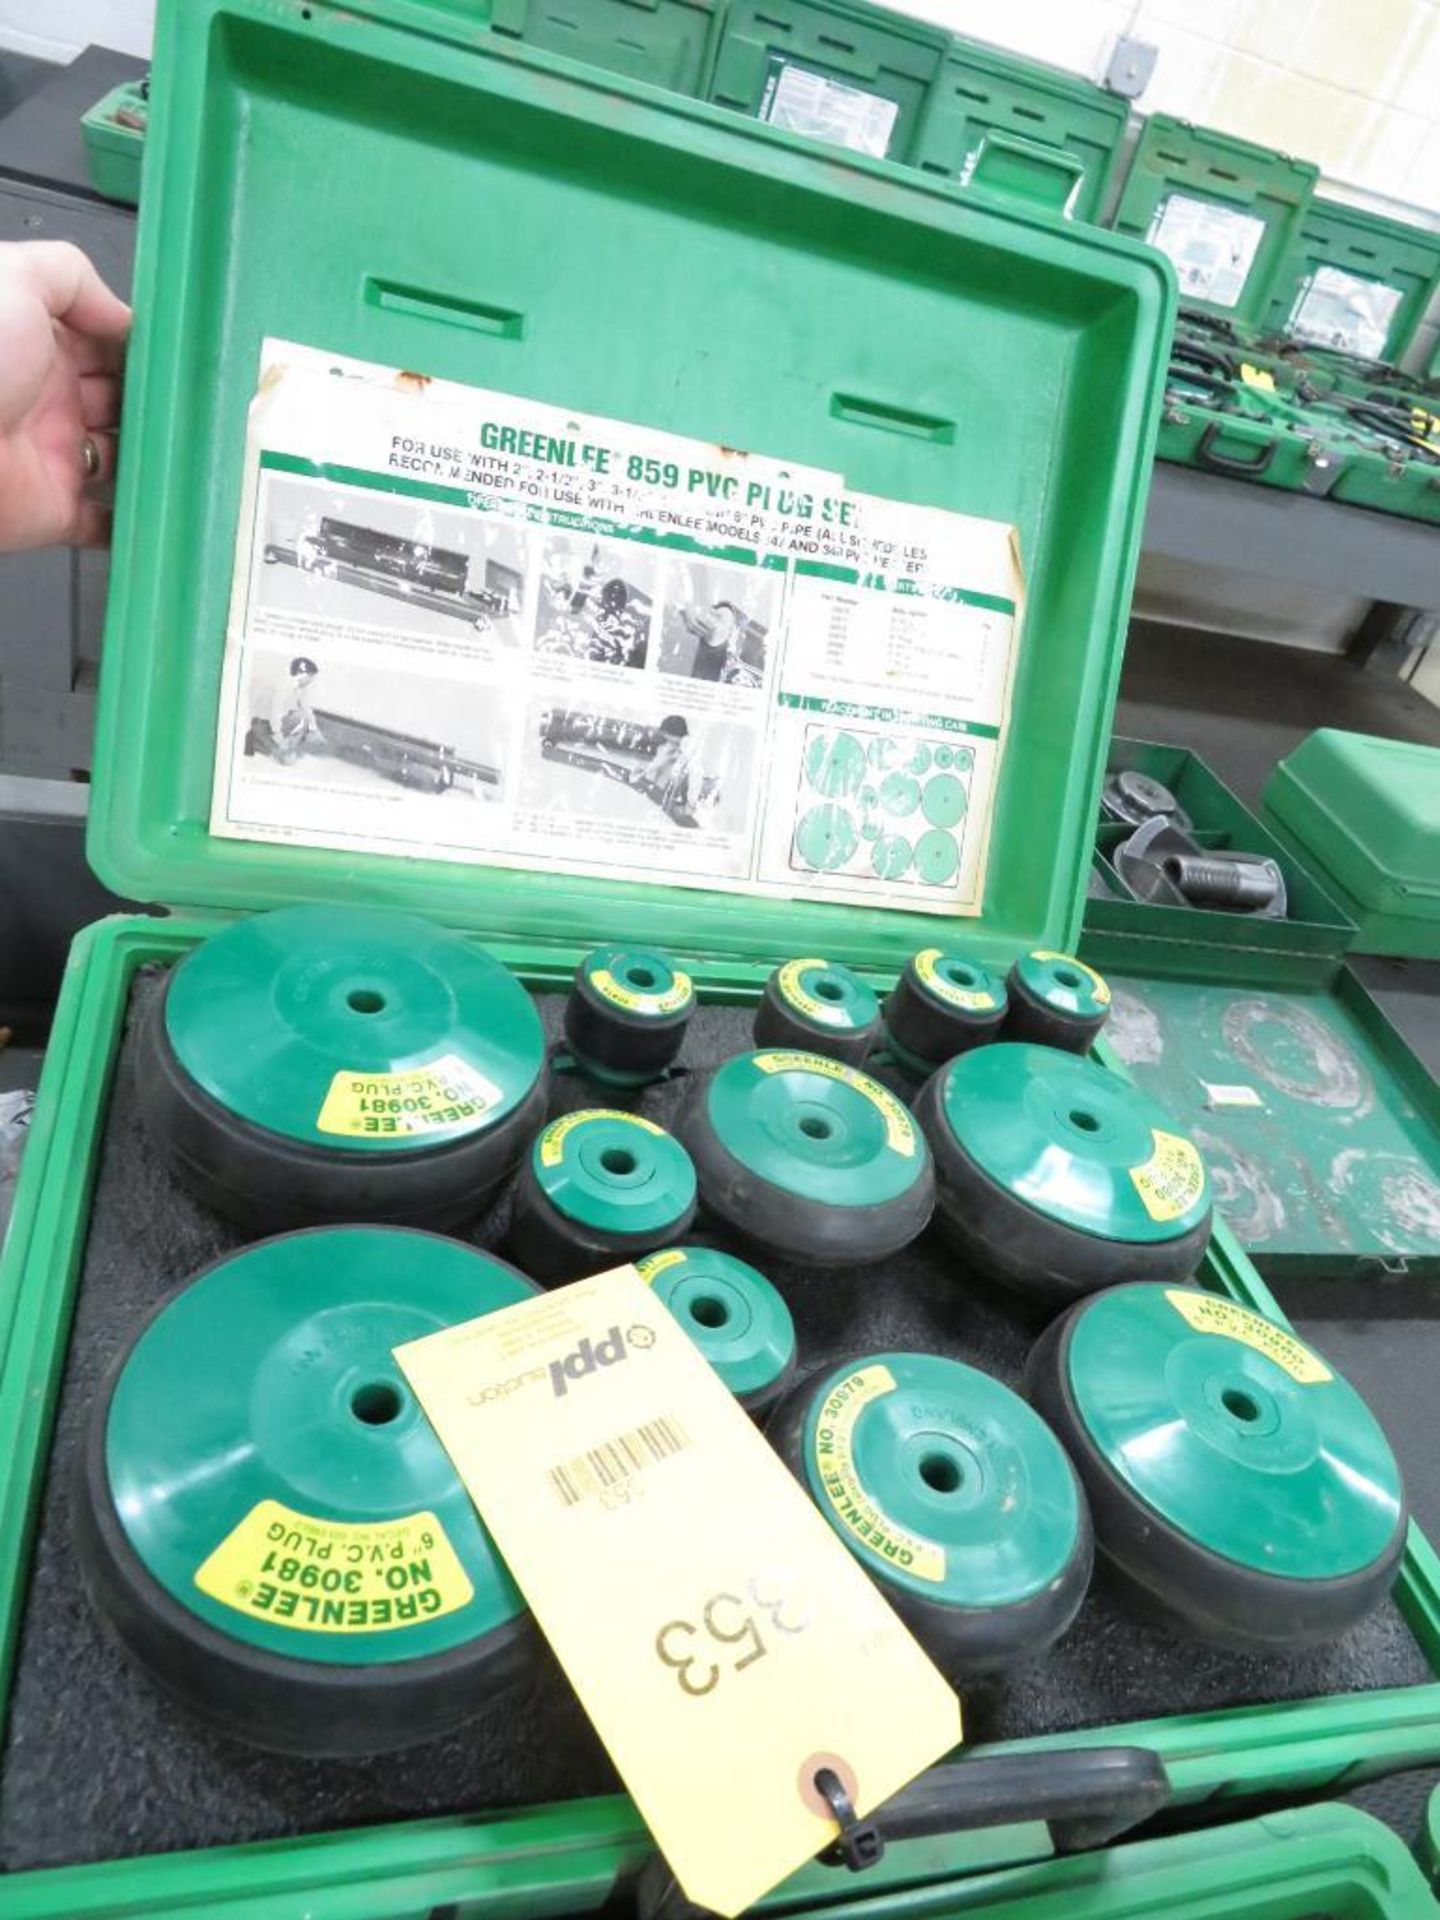 LOT: Greenlee Partial PVC Plug Set, with (12) Plugs, Case